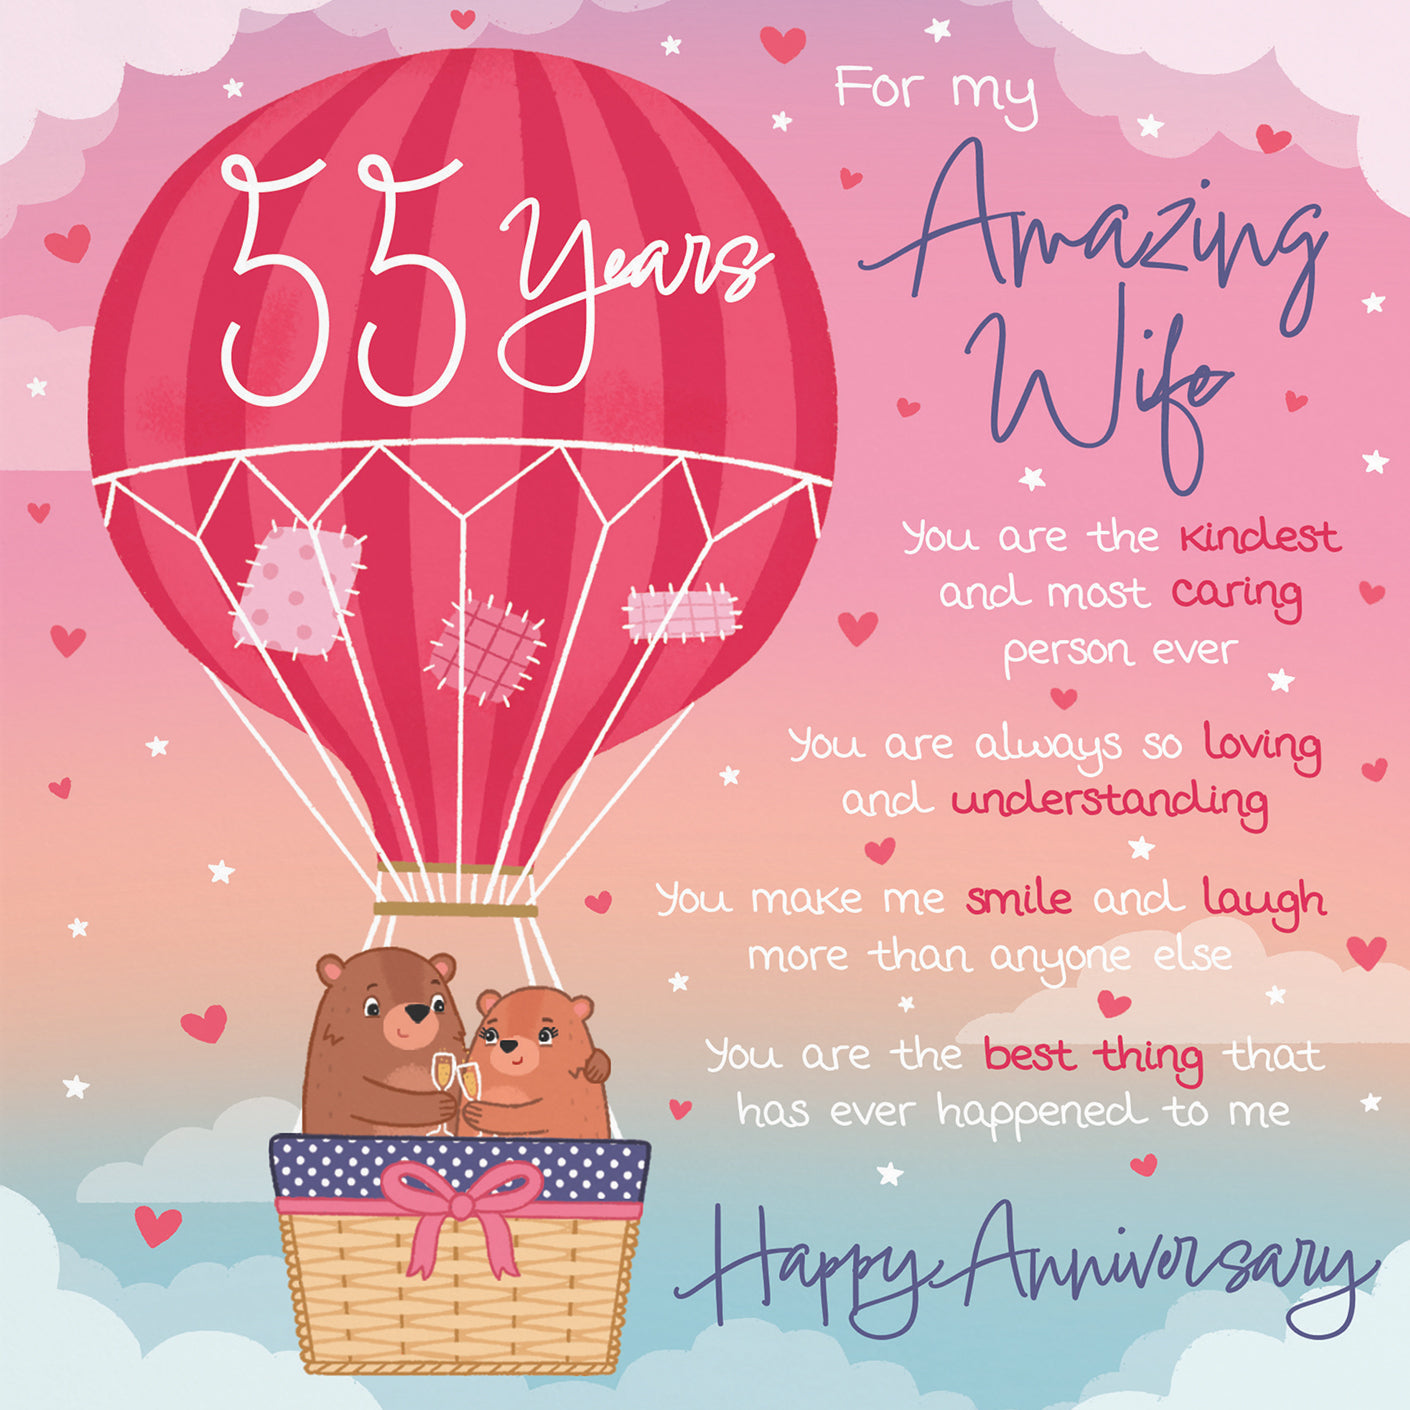 Wife 55th Anniversary Poem Card Love Is In The Air Cute Bears